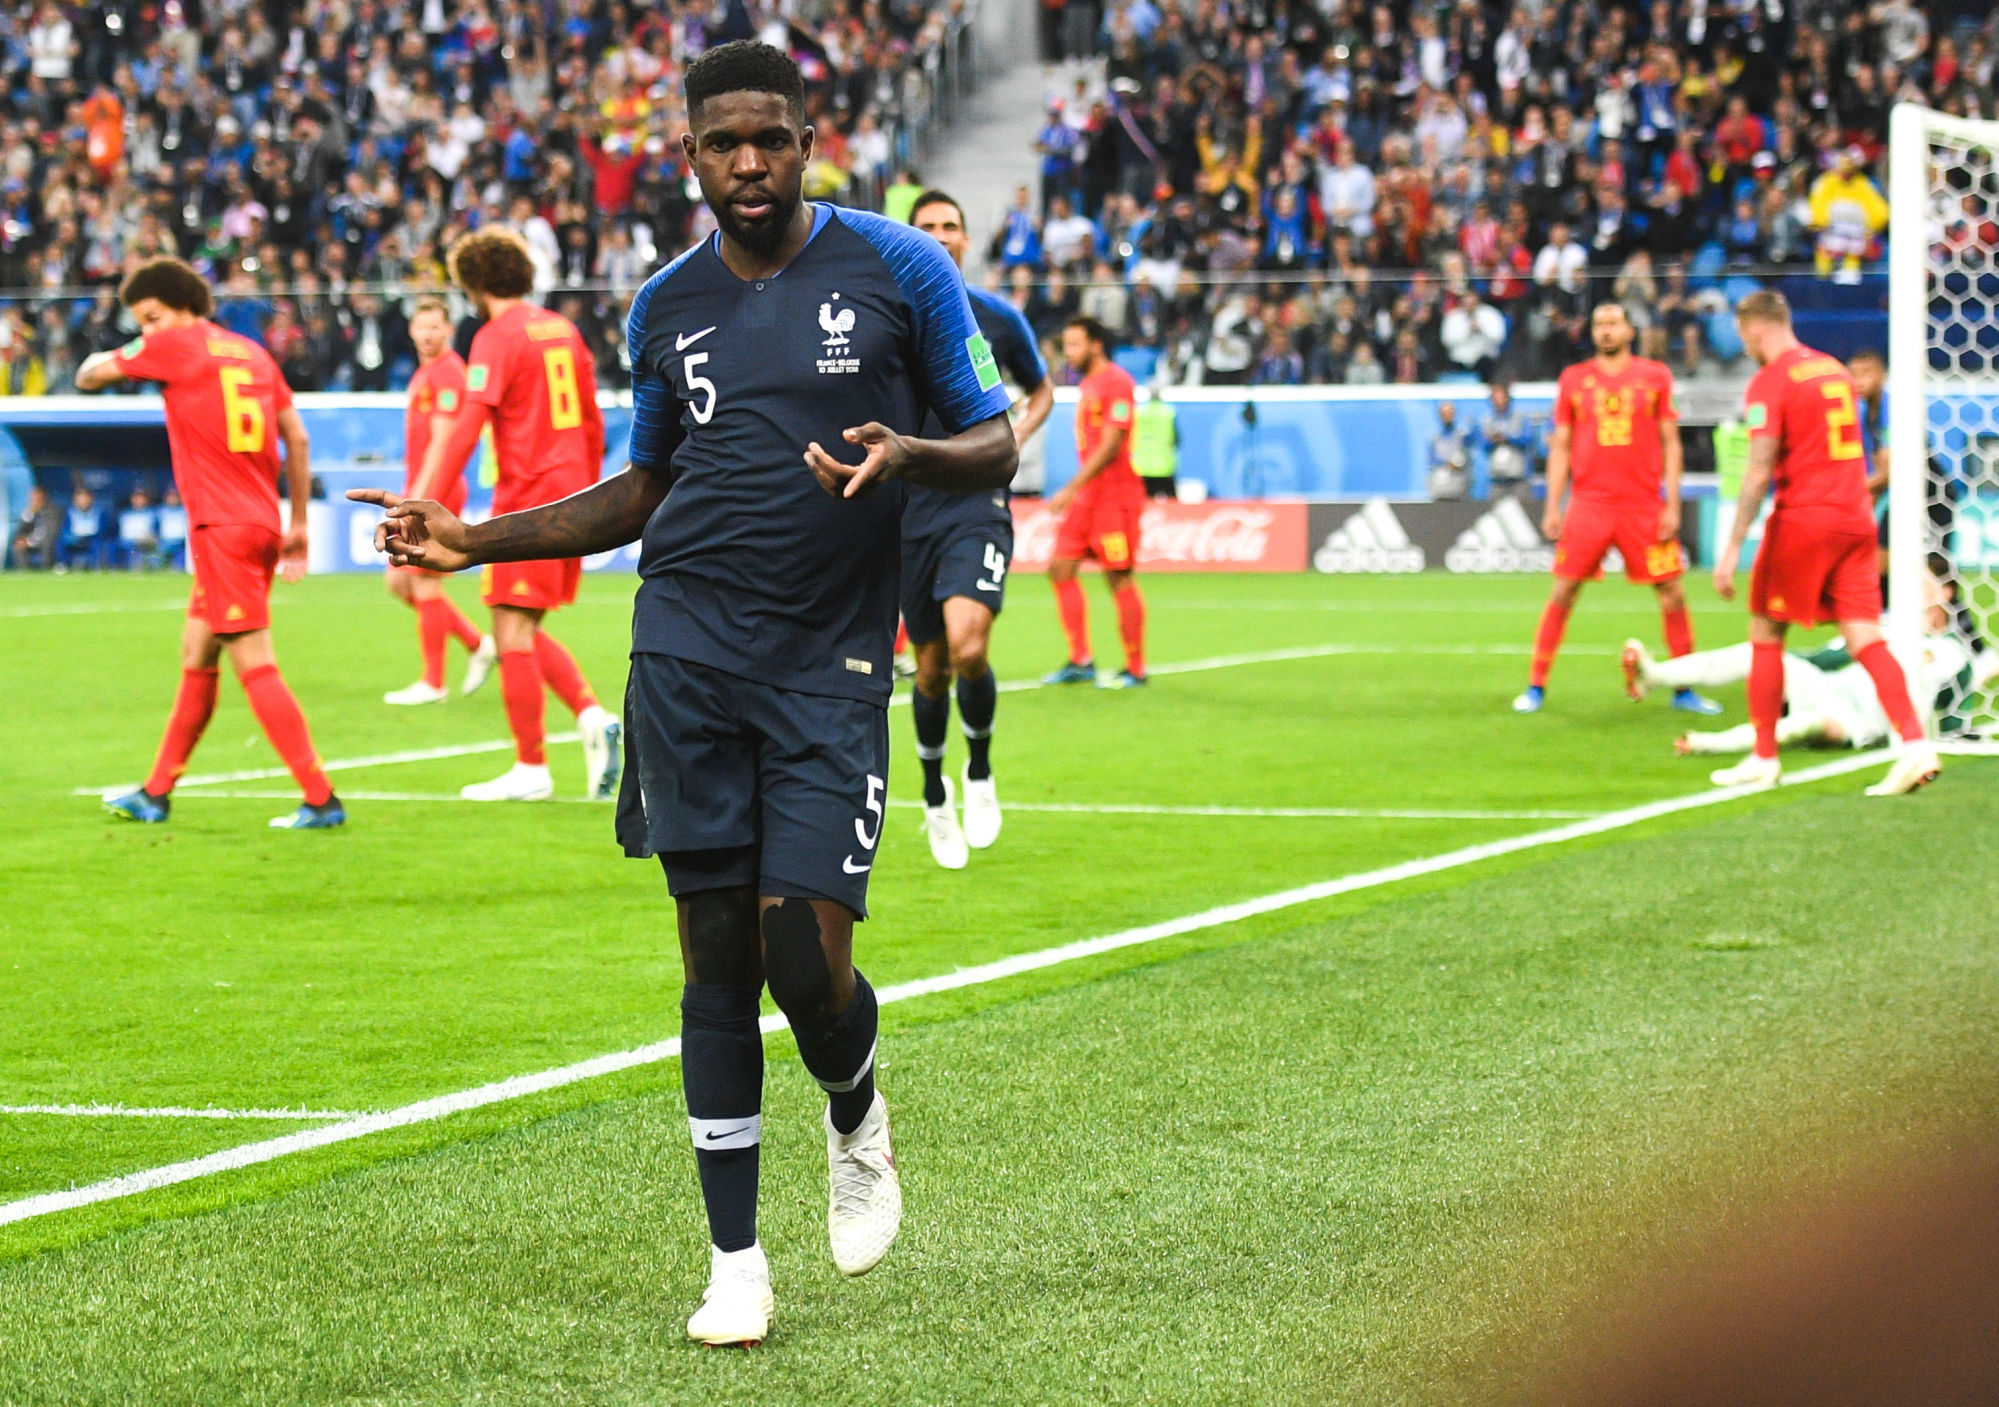 5585495 10.07.2018 France's Samuel Umtiti celebrates his goal during the World Cup semifinal soccer match between France and Belgium at the Saint Petersburg Stadium, in St.Petersburg, Russia, July 10, 2018. Vladimir Astapkovich / Sputnik / Icon Sport